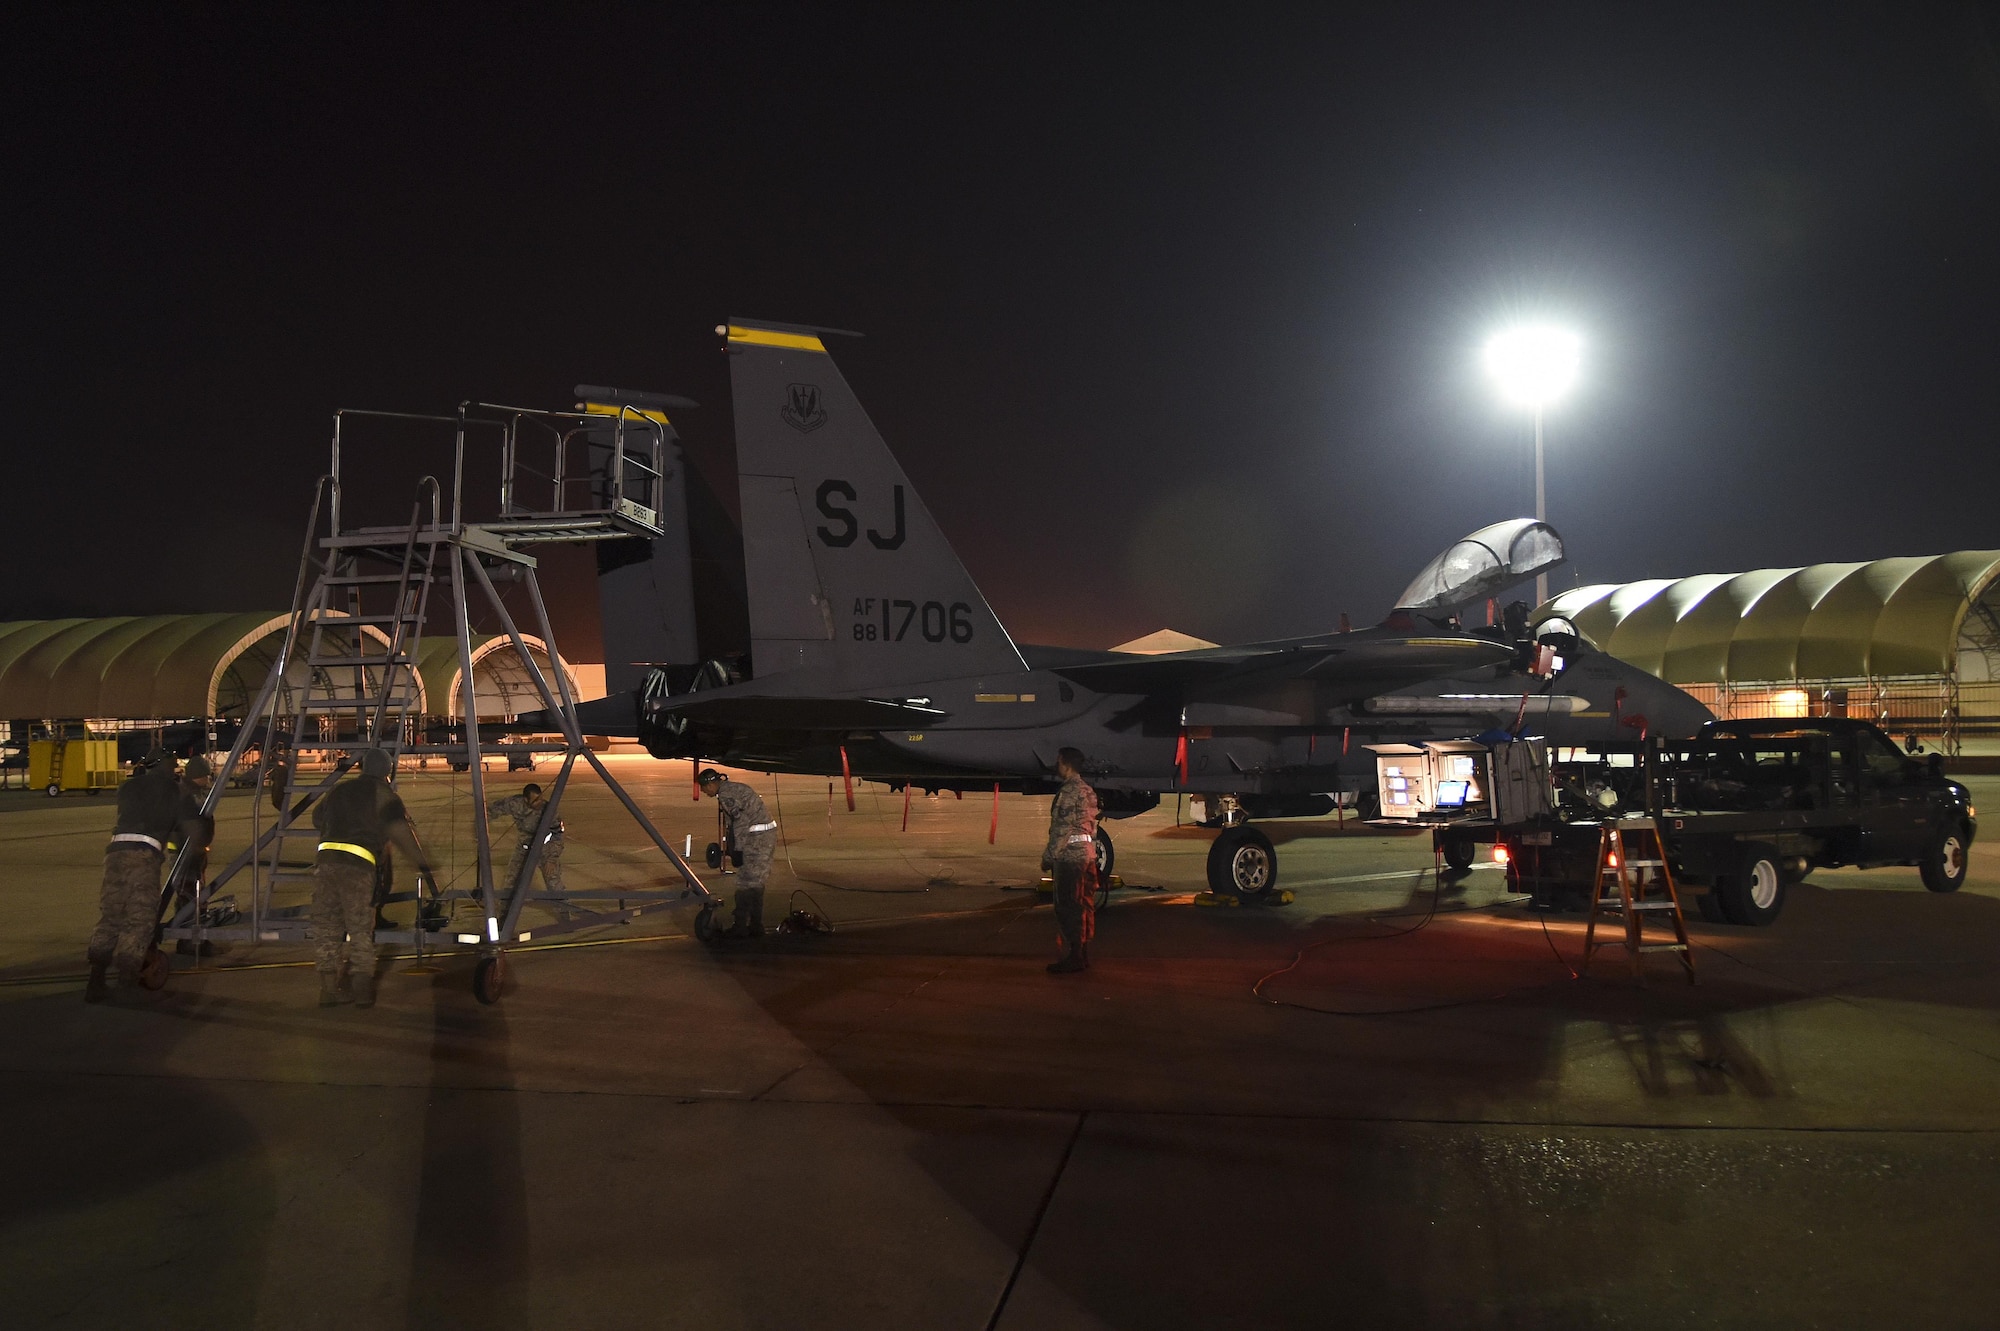 Airmen assigned to the 16th Electronic Warfare Squadron, Eglin Air Force Base, Florida, move a stand into position behind an F-15E Strike Eagle during Combat Shield, Oct. 20, 2015, at Seymour Johnson Air Force Base, North Carolina. Every year, members of the squadron evaluate the EW systems of all functional combat airframes within Air Combat Command in accordance with the Combat Shield program. (U.S. Air Force photo/Senior Airman Aaron J. Jenne)